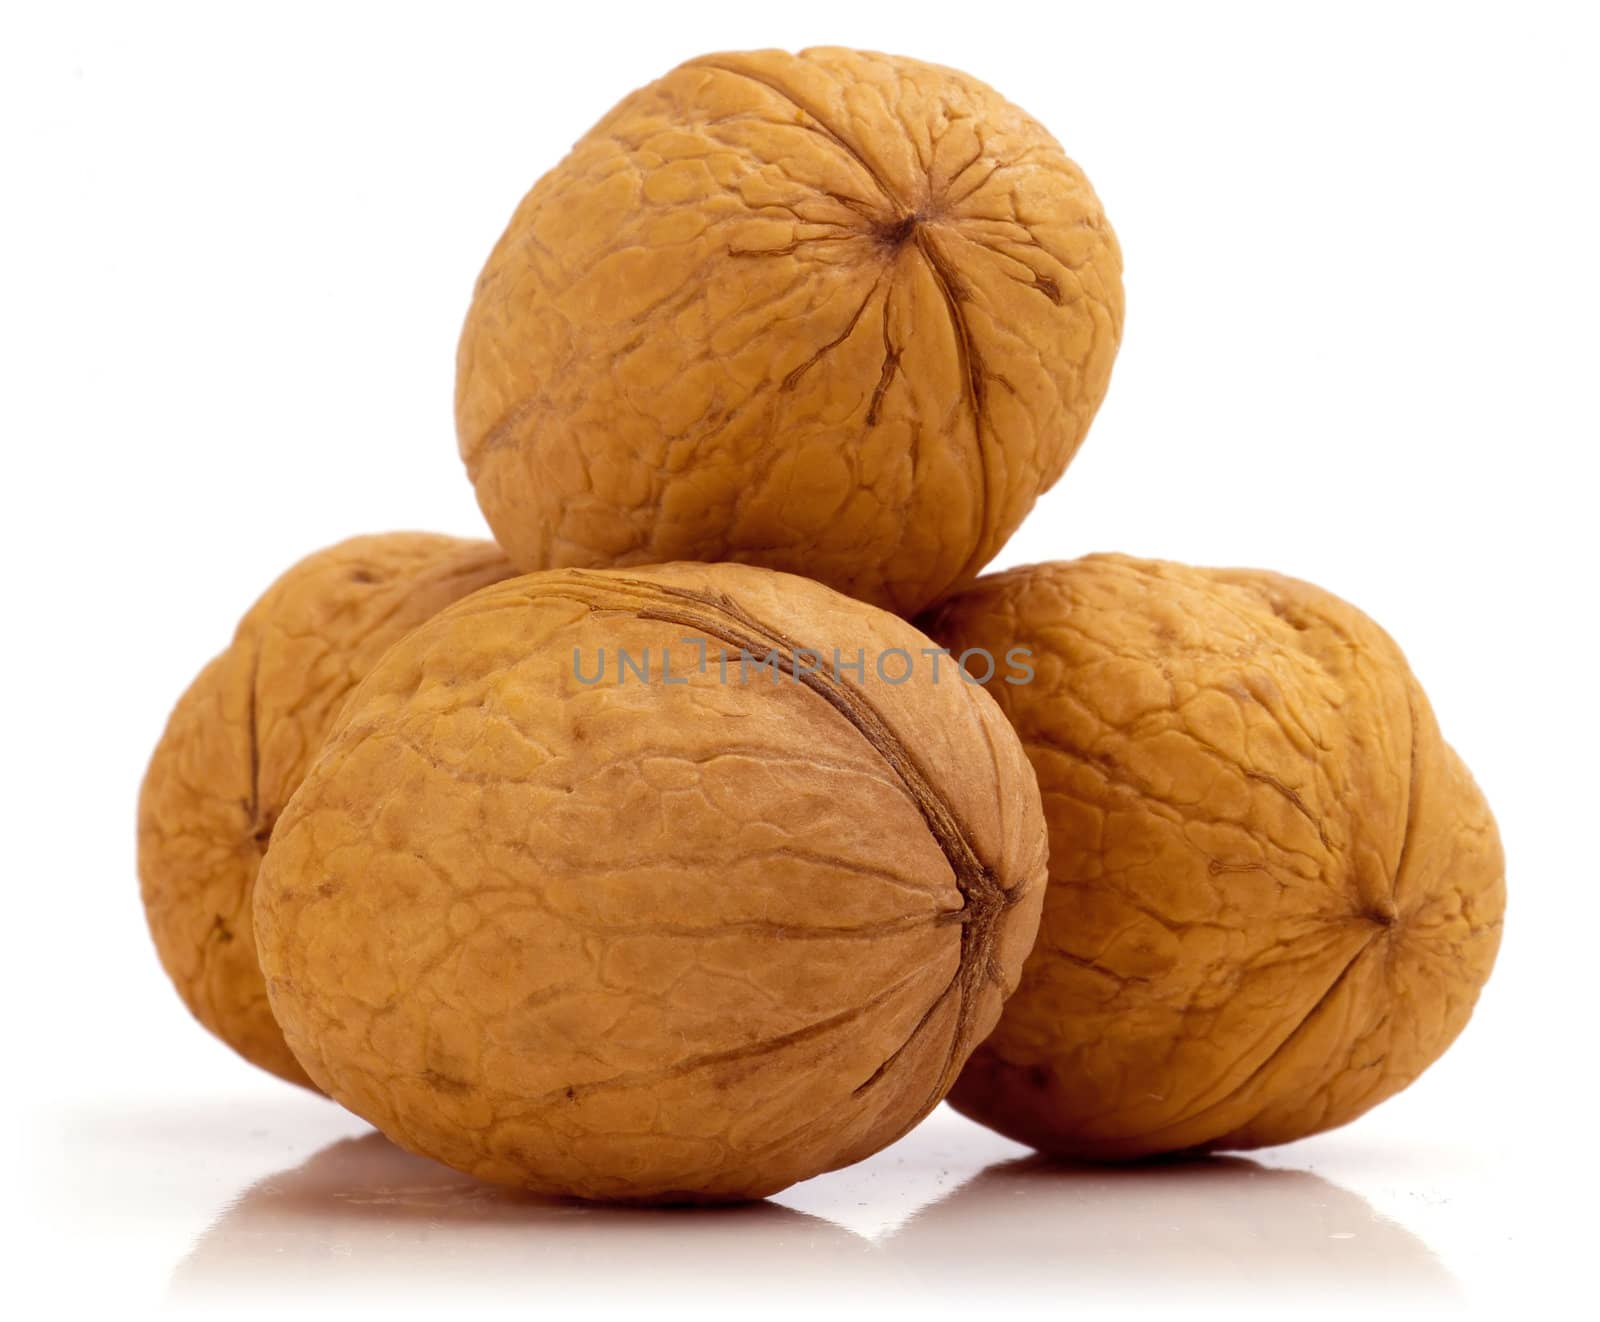 Stack of four walnuts. Isolated on a white background.